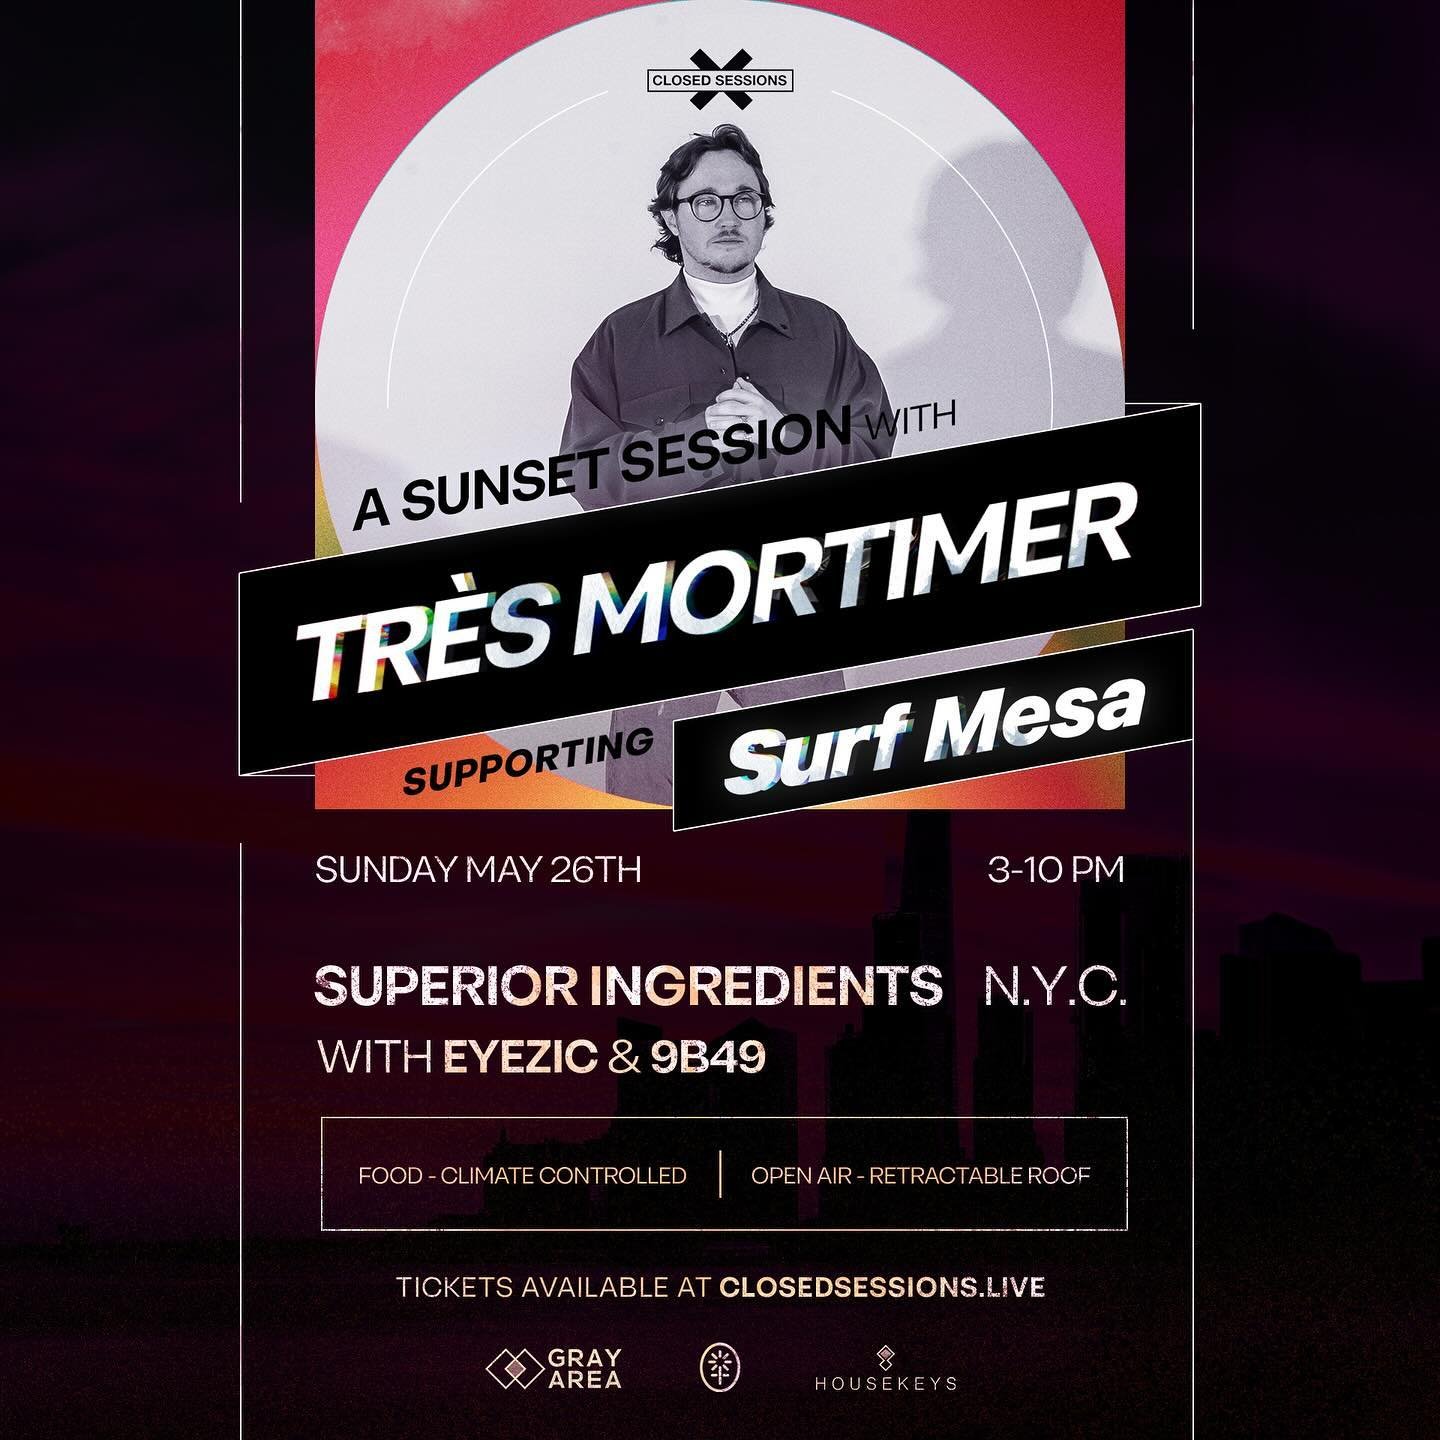 ☀️🌇As if your Memorial Day week couldn&rsquo;t get any better, we&rsquo;re adding a killer supporting lineup for Surf Mesa in NYC and DC. 

Both shows are on one of the best rooftops in their cities. Both protected by a retractable glass roof and ar